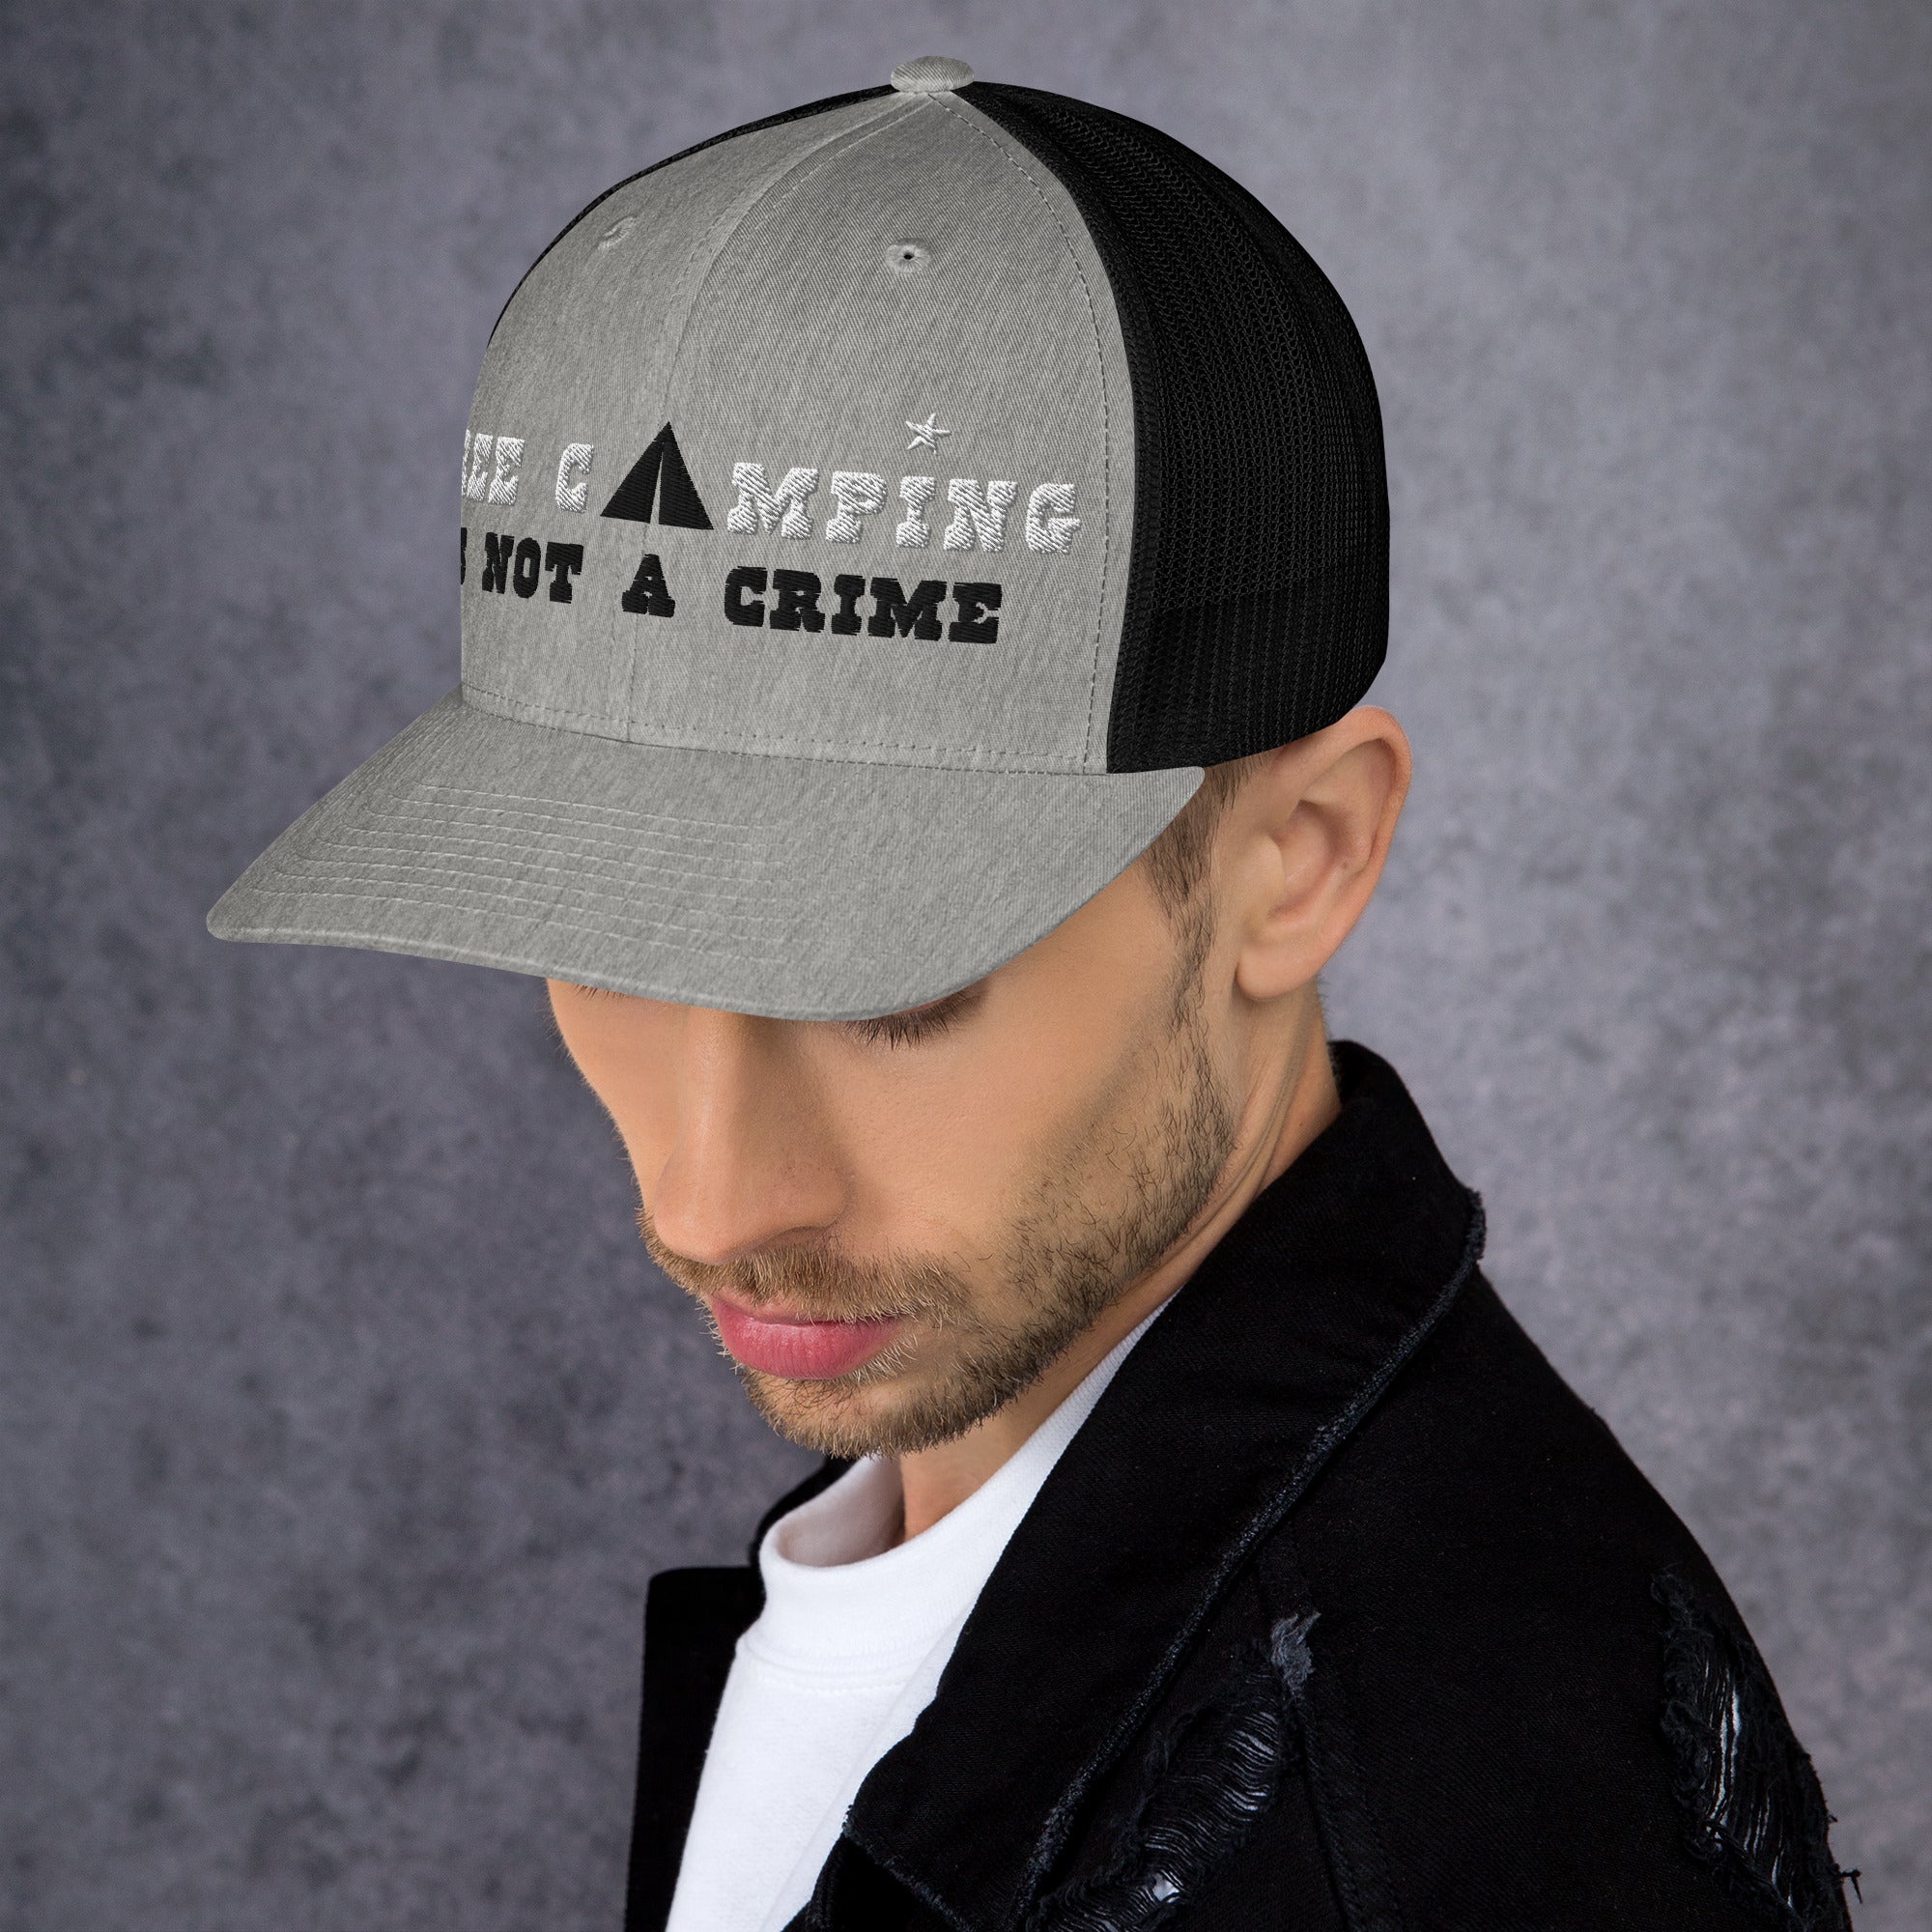 Casquette trucker rétro bicolore Free camping is not a crime white/black